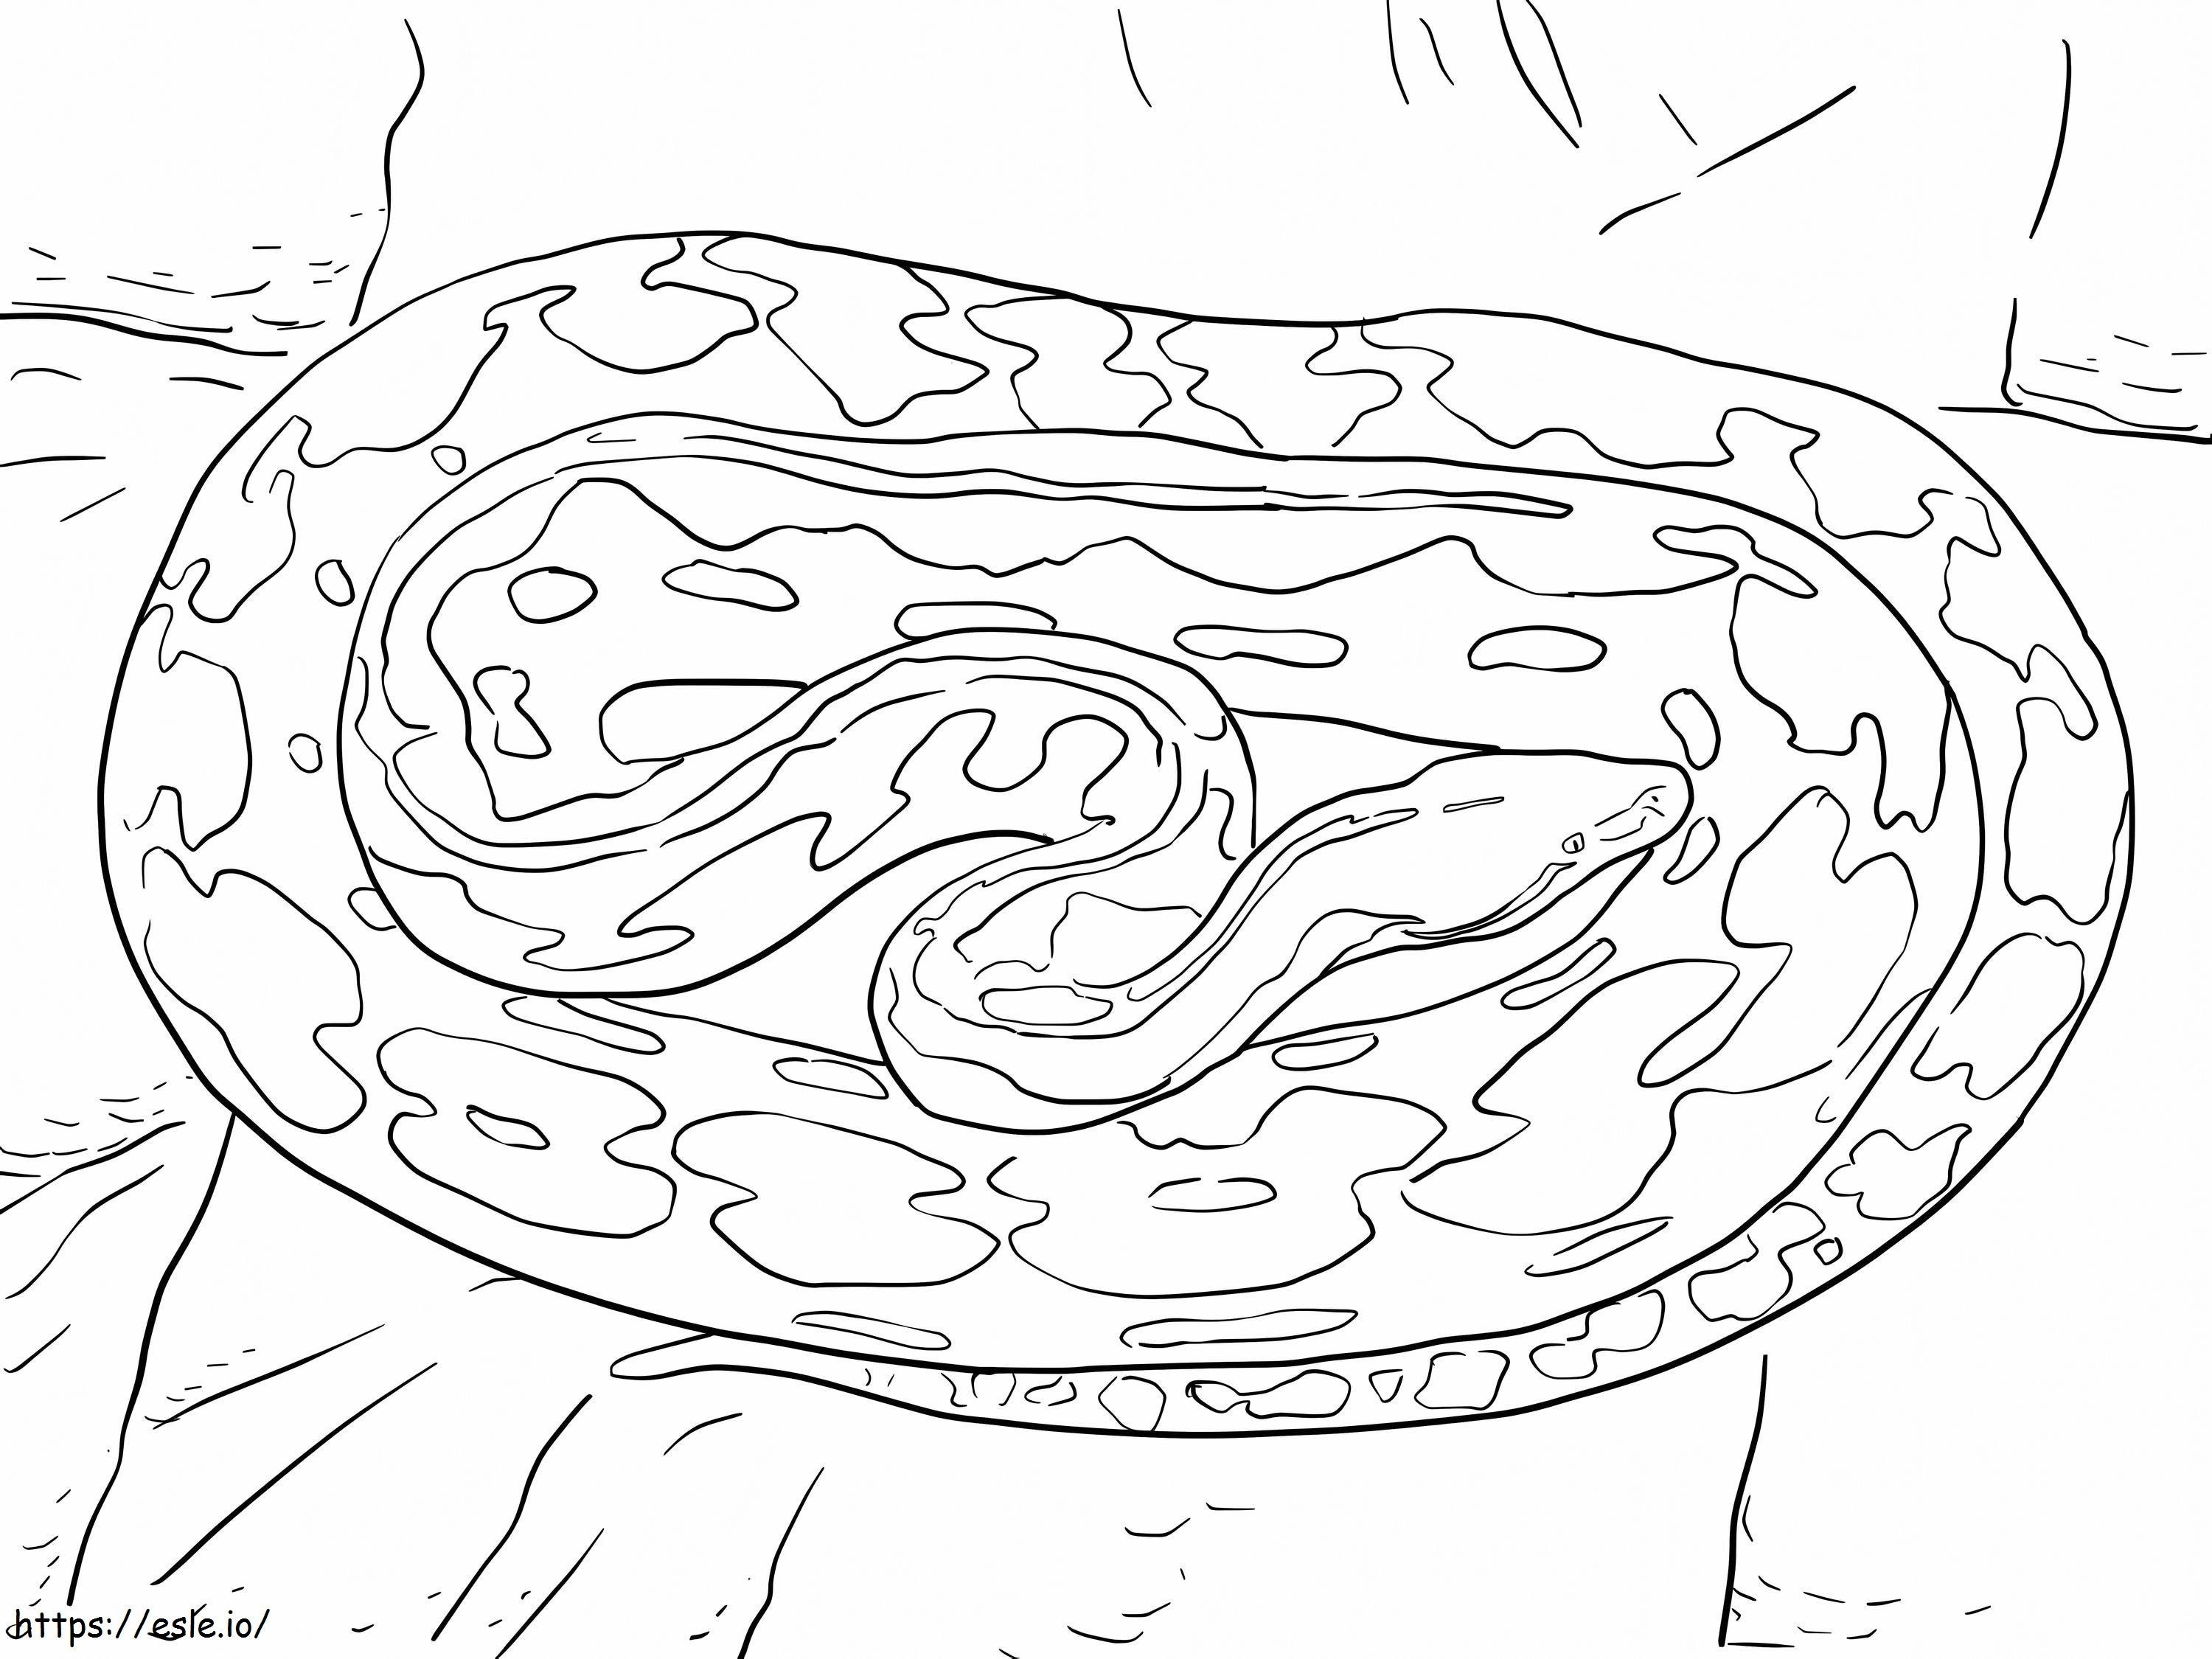 Reticulated Python coloring page